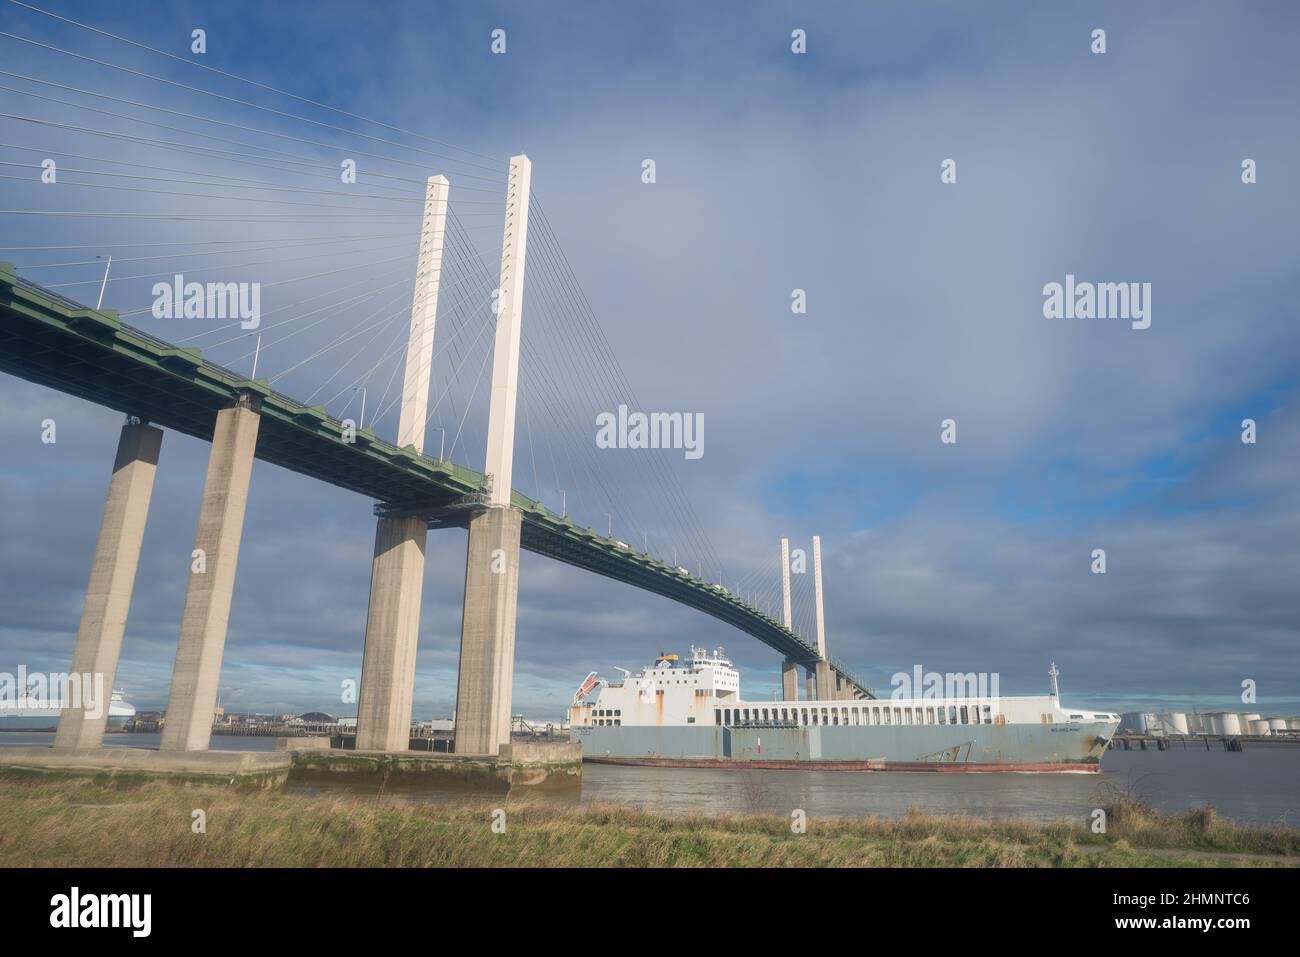 Dartford-Thurrock river crossing a cable-stayed bridge with Thames at low tide with cargo ship Ferry Wilhelminde sailing beneath just left Purfleet Stock Photo